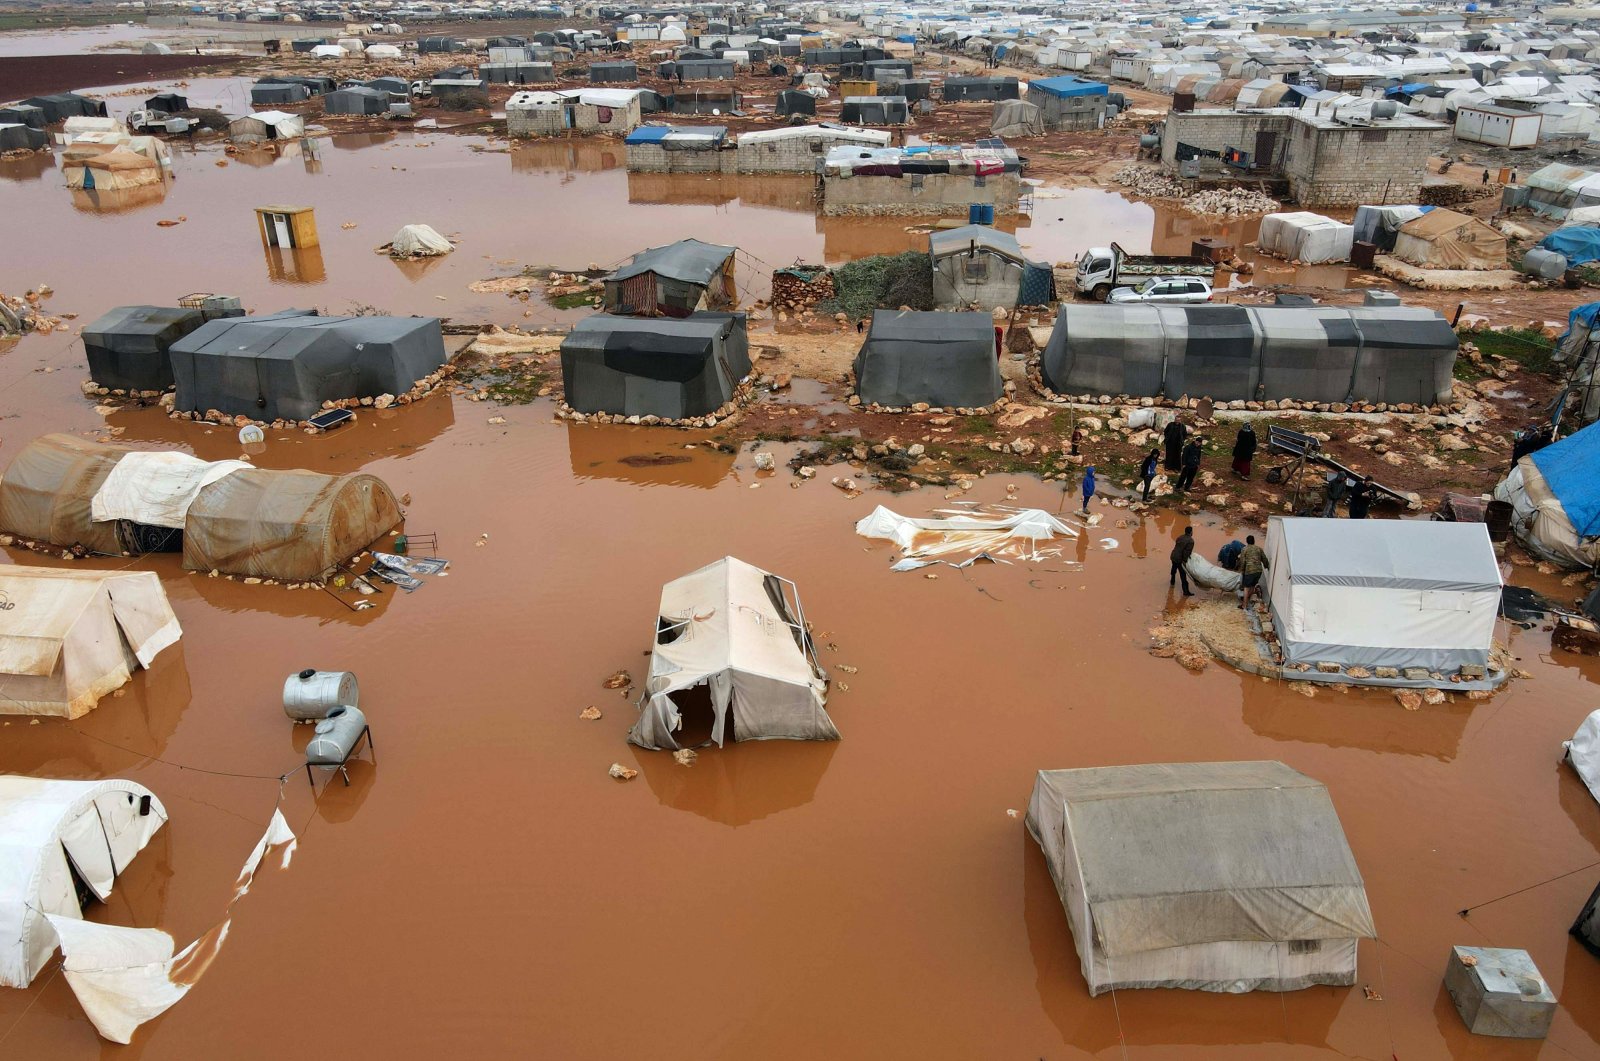 An aerial picture shows flooded tents after heavy rain at a camp for displaced Syrians near the town of Kafr Lusin by the border with Turkey, in northwestern province of Idlib, Syria, Jan. 19, 2021. (AFP Photo)